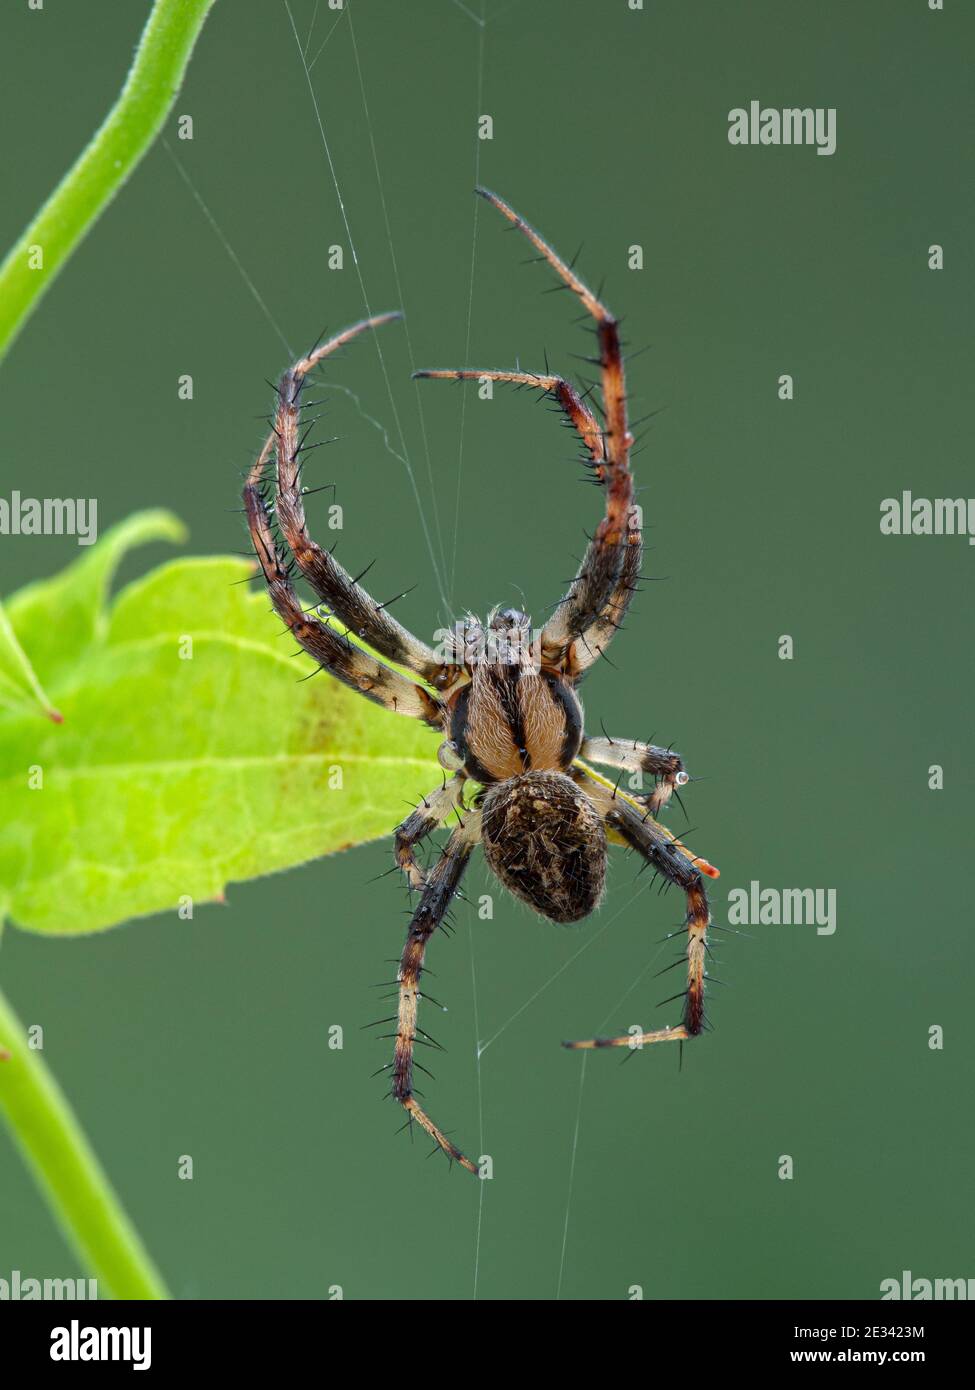 Vertical image of a small, nicely marked male orbweaver spider, resting on its web. Boundary Bay saltmarsh, Ladner, Delta, British Columbia, Canada Stock Photo